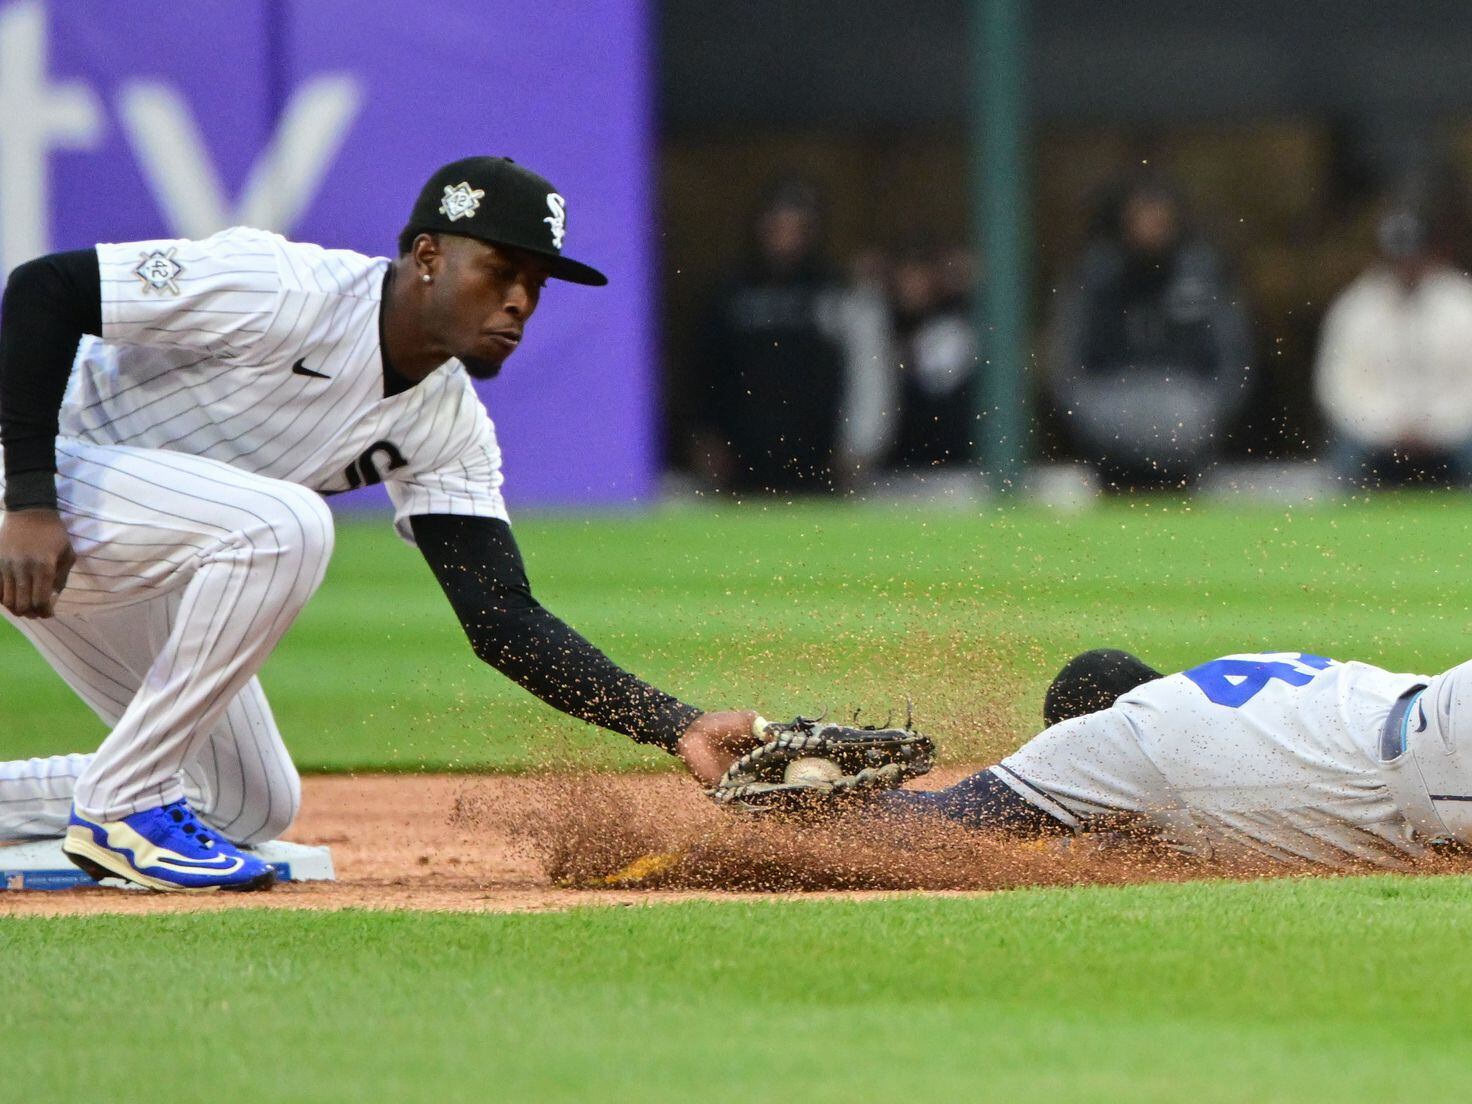 Chicago White Sox: Tim Anderson is one elite shortstop